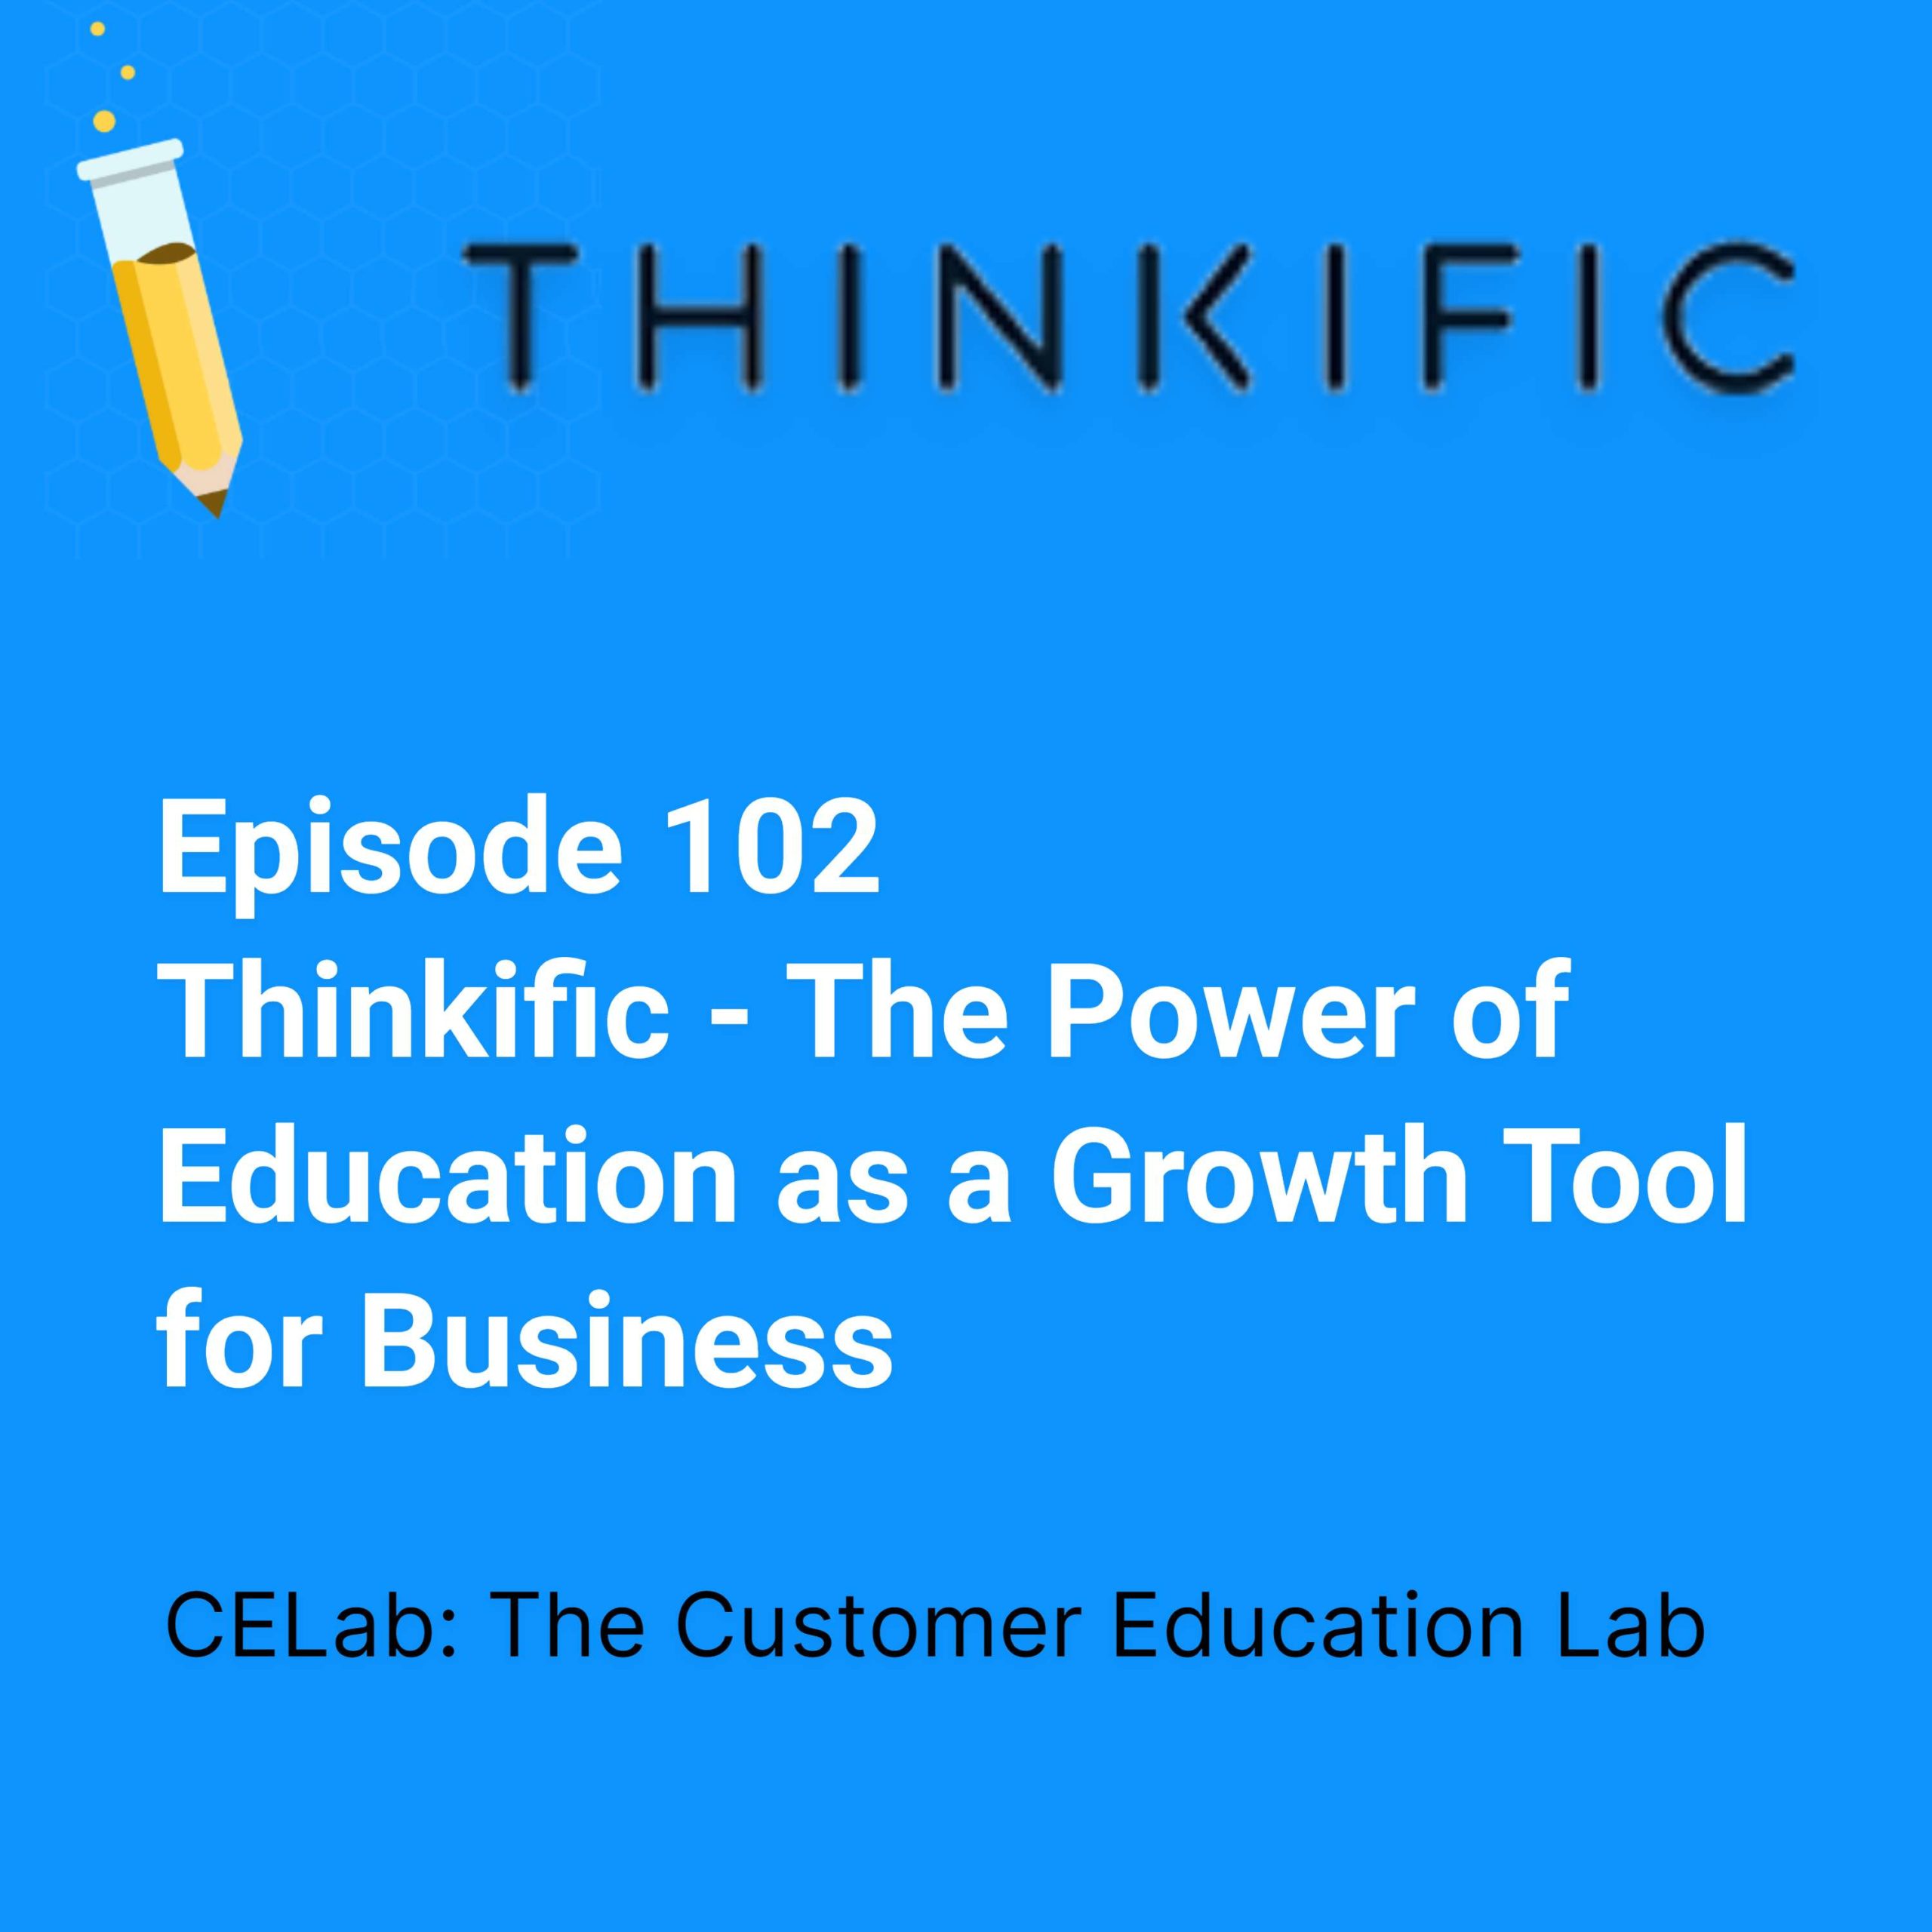 Episode 102 - Thinkific - The Power of Education as a Growth Tool for Business